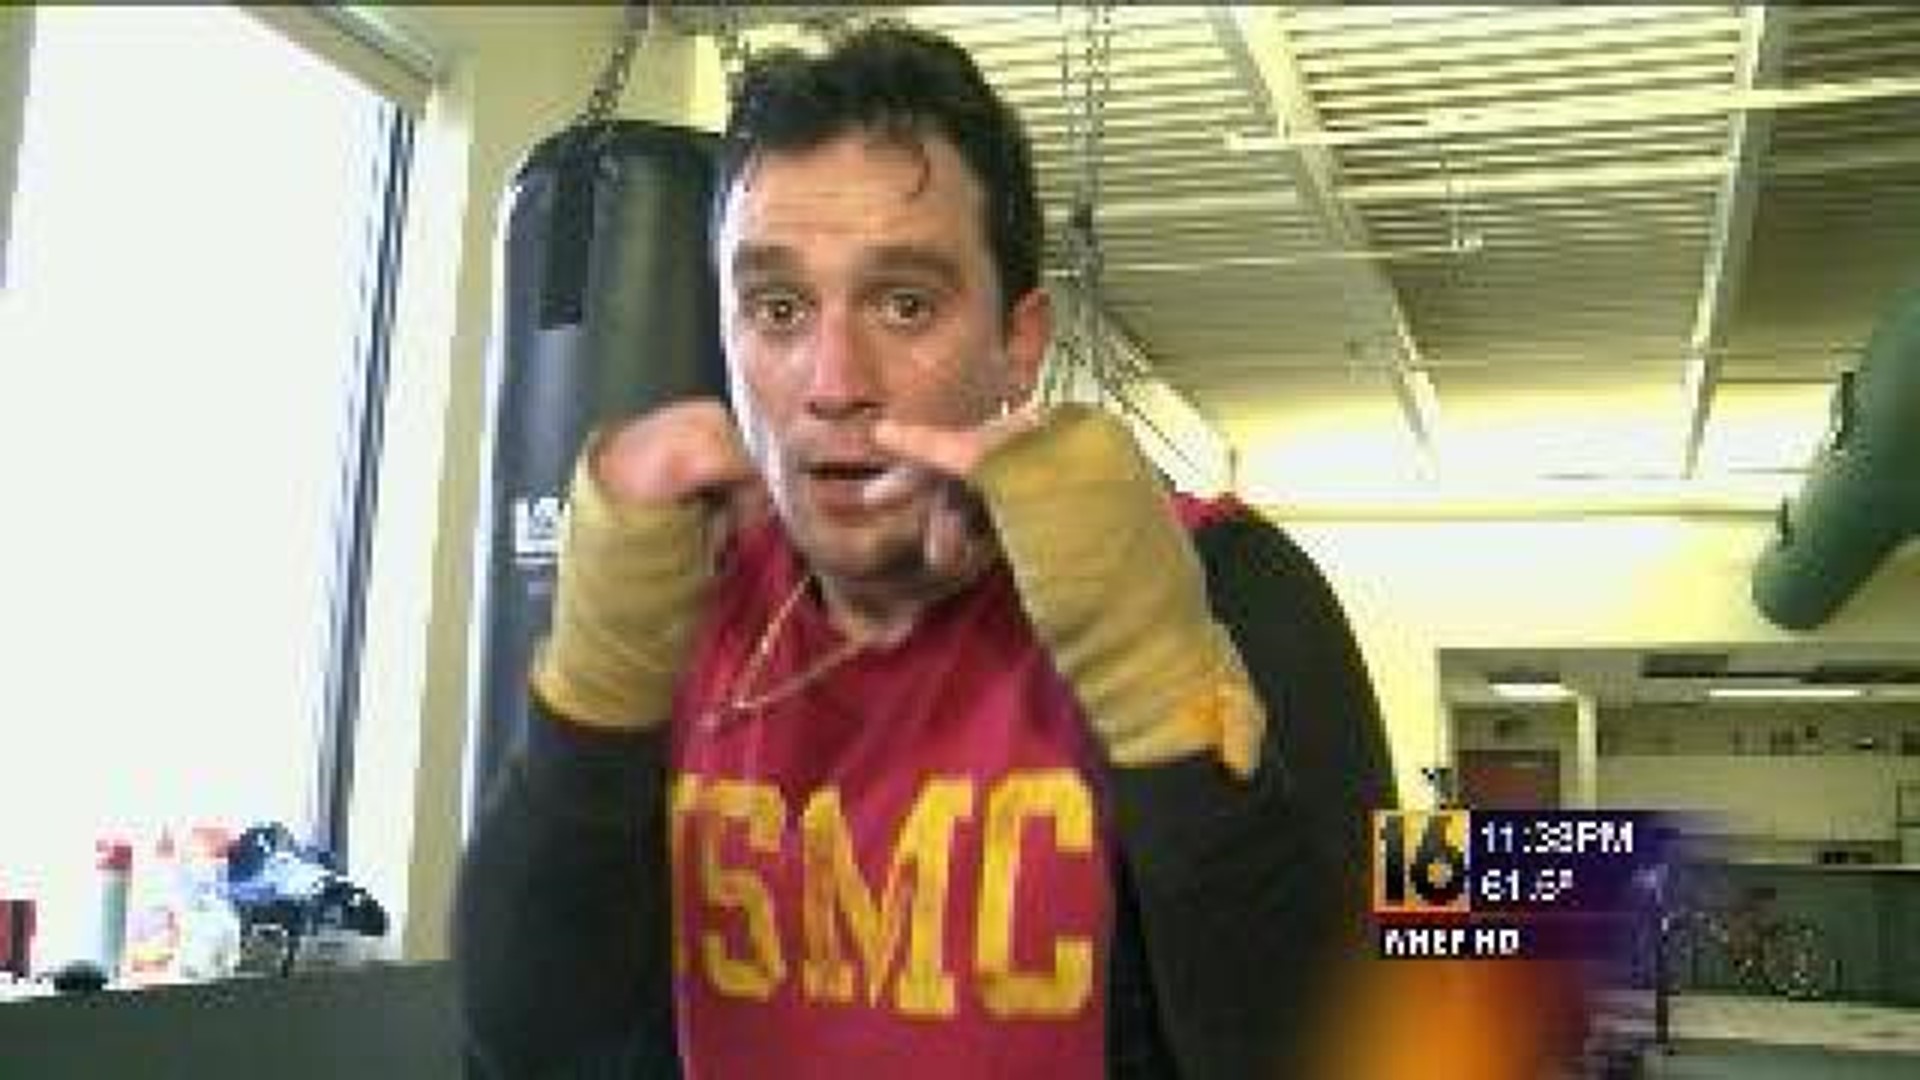 Boxing Event Benefits Wounded Veterans